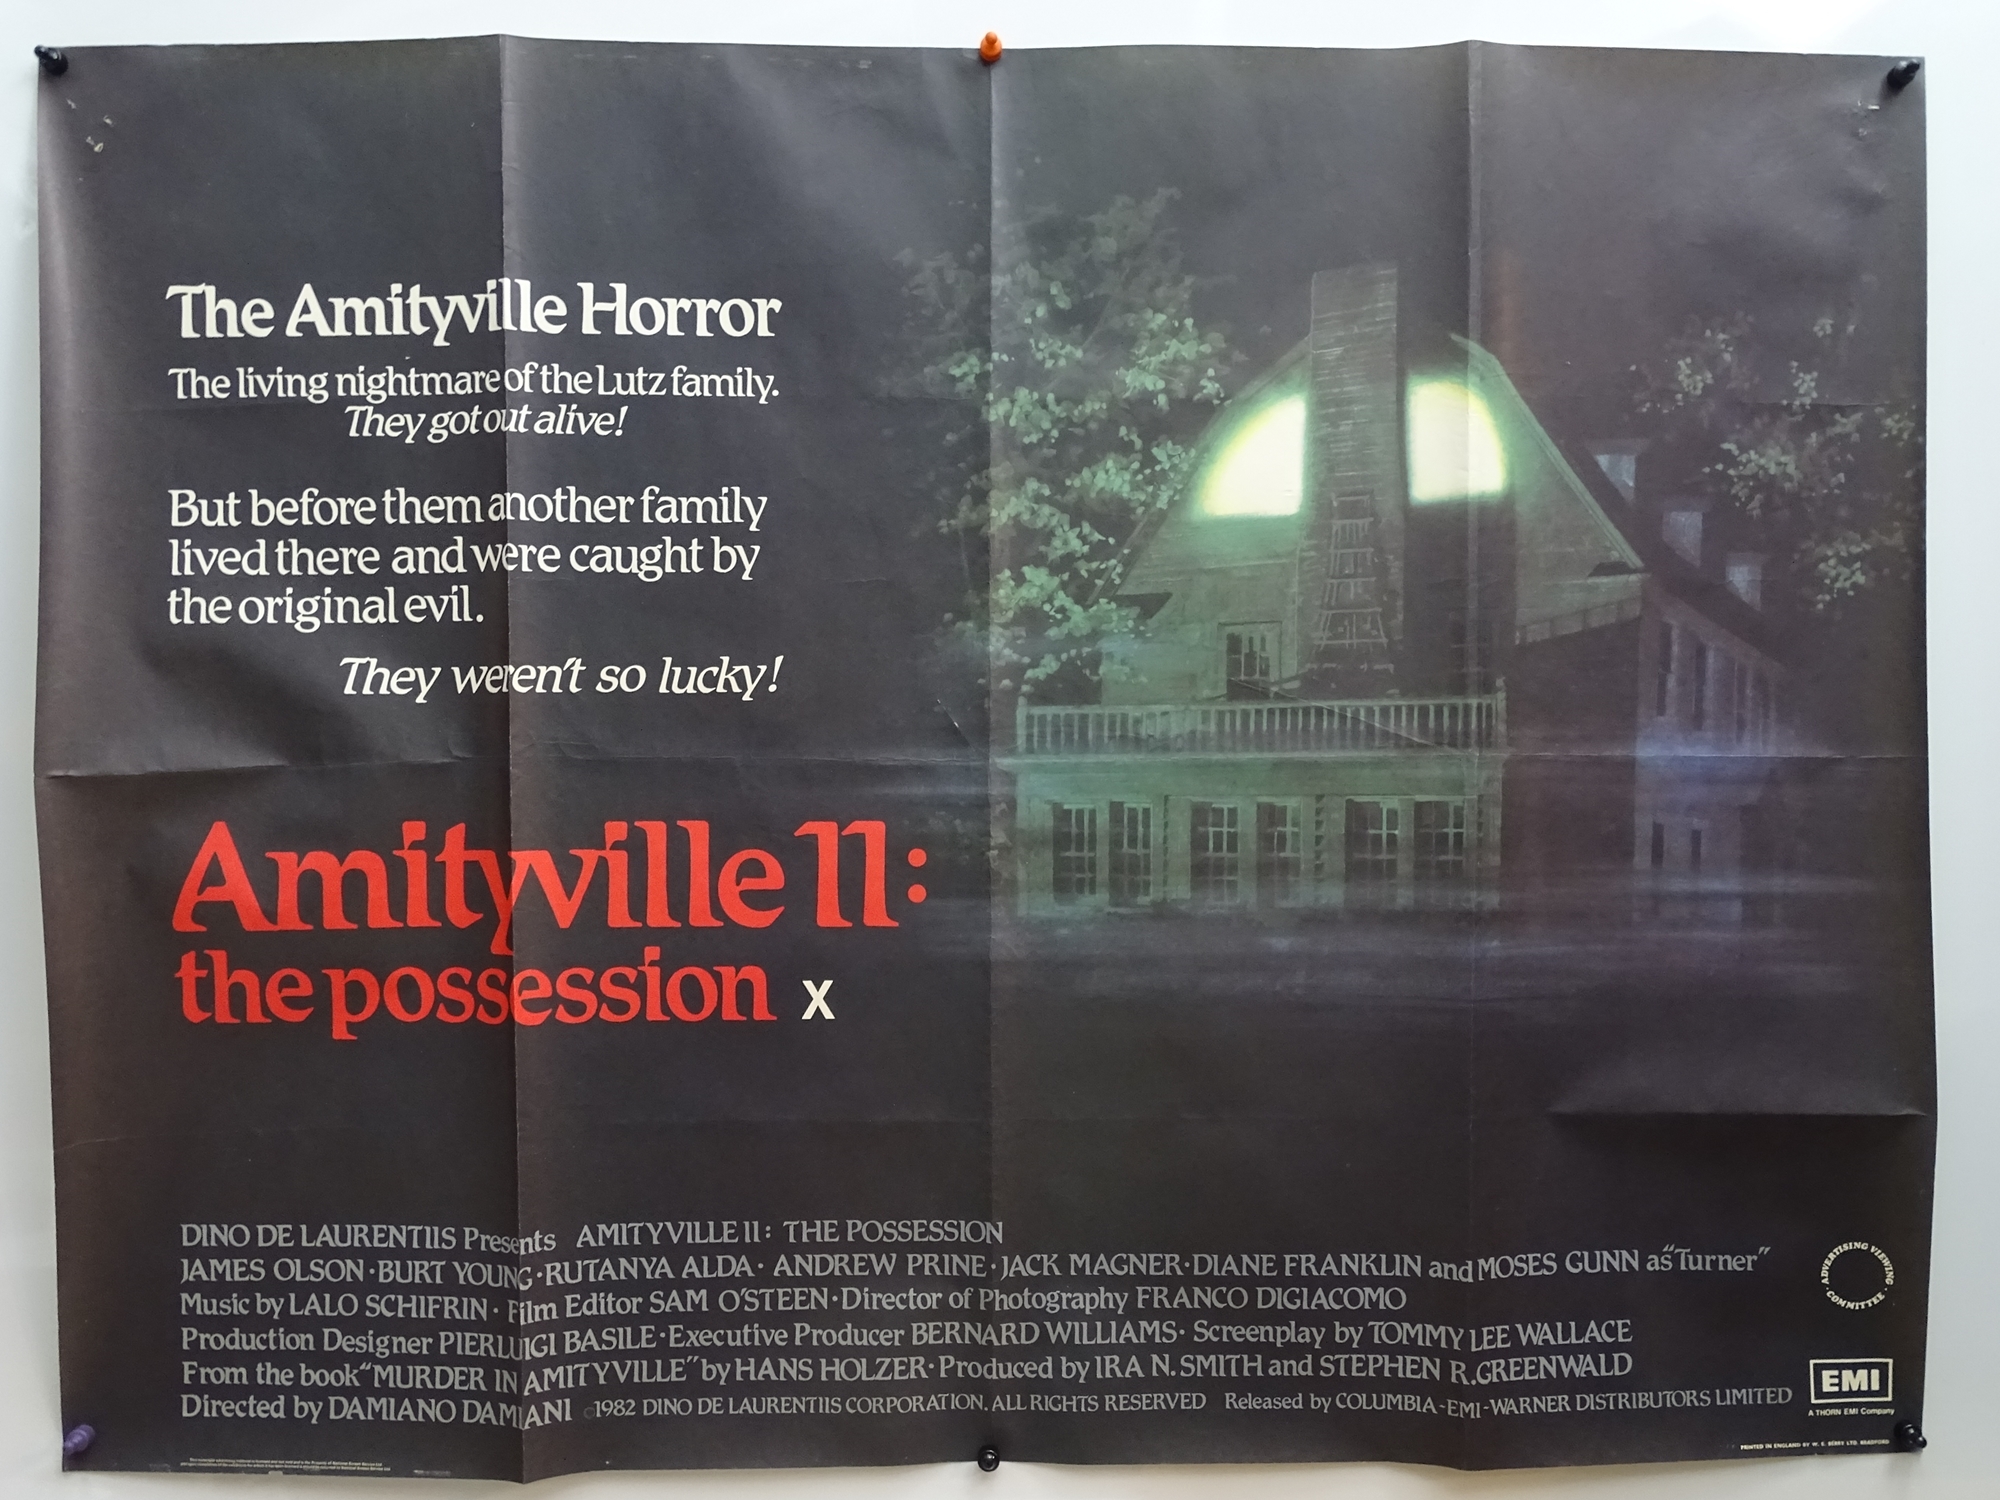 AMITYVILLE Group of Memorabilia: : THE AMITYVILLE HORROR (1979) UK Quad Film Poster, US One Sheet,